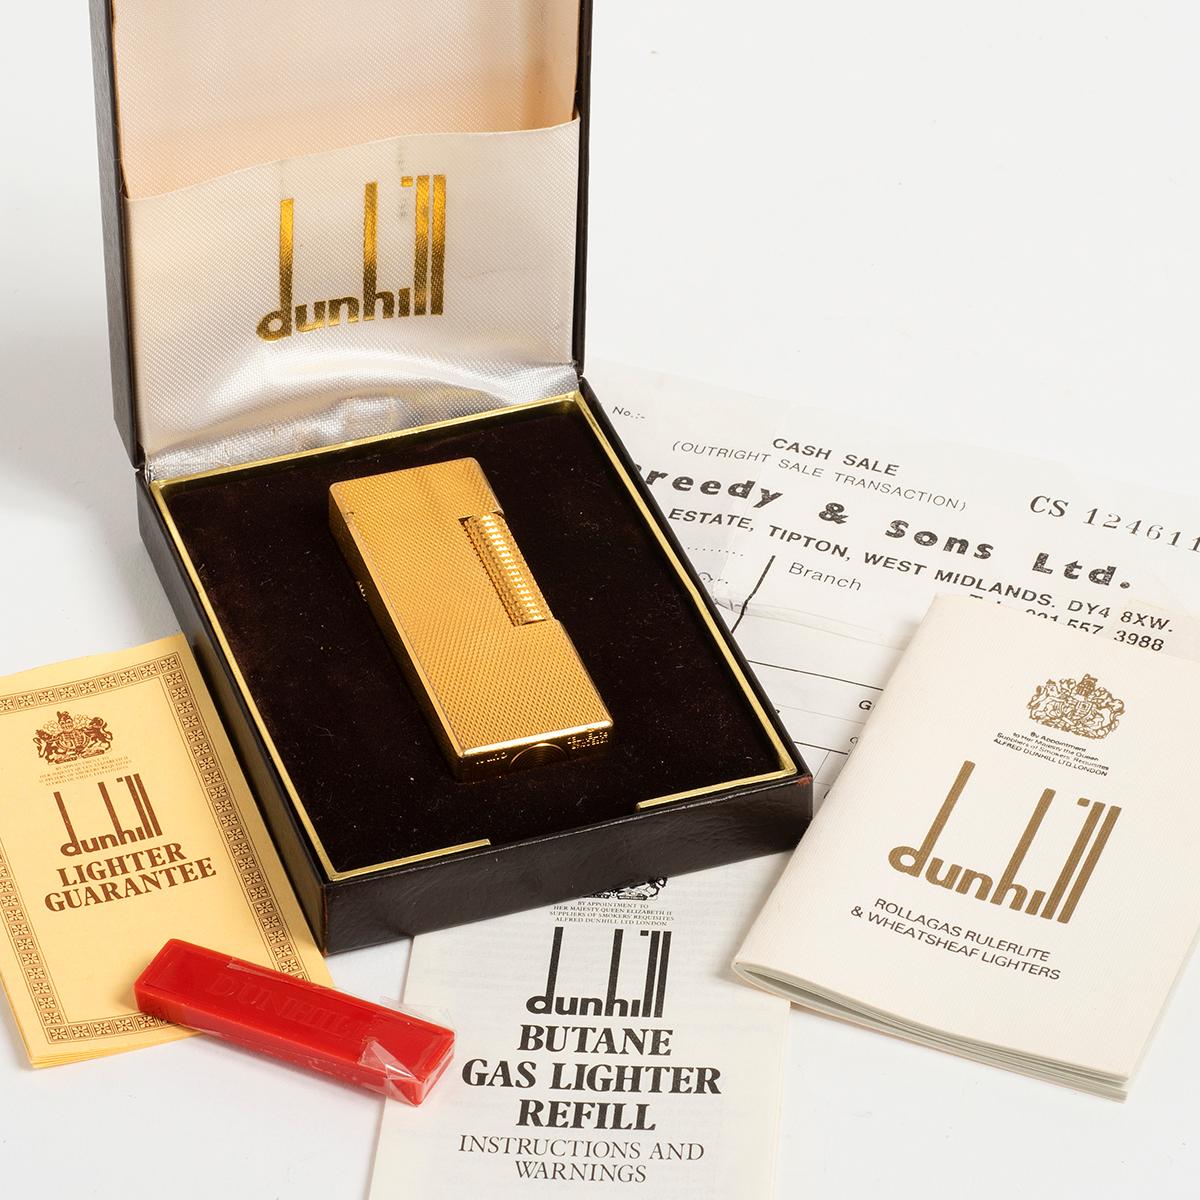 Our vintage Dunhill lighter in gold capped steel is presented in wonderful original condition with only light signs of use. Notably, this example comes with original box, warranty papers (undated) and purchase receipt dated 1979 as well as spare